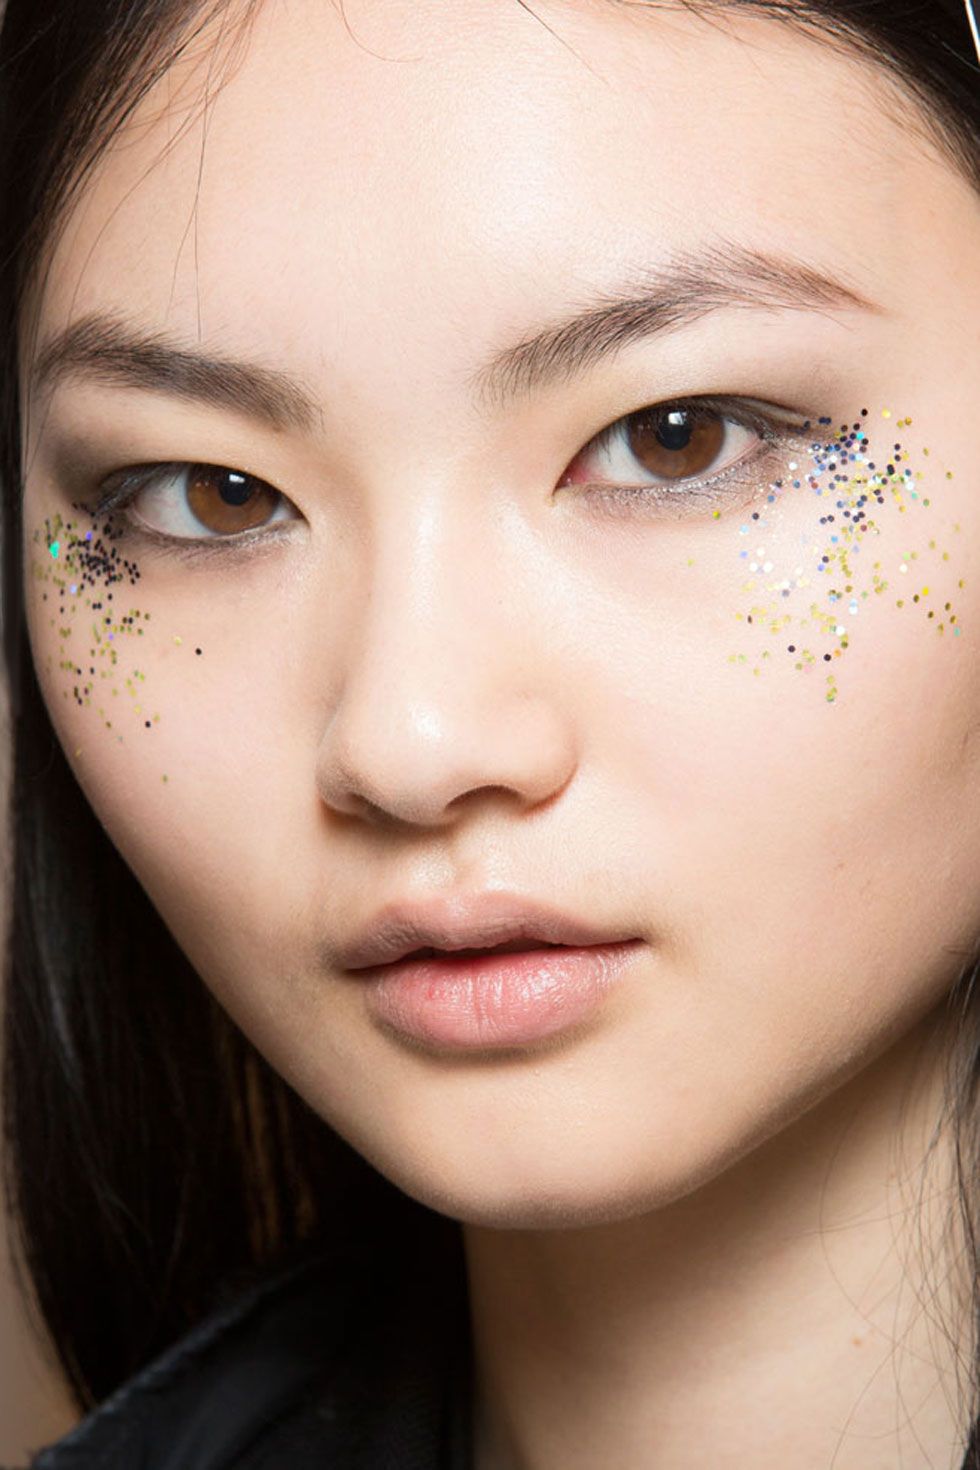 <p>Backstage at Burberry, we gasped at Wendy Rowe's glitter look, which dusted models cheeks and under eyes with tons of sparkle. It was a lighter version of Saint Laurent's glitter tears, but no less stunning on the catwalk, or in real life, as models like Malaika Firth and Binx Walton exited the show, sparkles still intact.</p><p>"The glitter tears that are happening on the runways at the moment are really cool," Teasdale says, "and you're seeing it on the runway and also the red carpet almost at the same time. It's easy to tag it to Bowie and glam rock, but I think it can look very feminine and very, very pretty if you spread out the glitter like Suki Waterhouse did. It's so cute."</p>